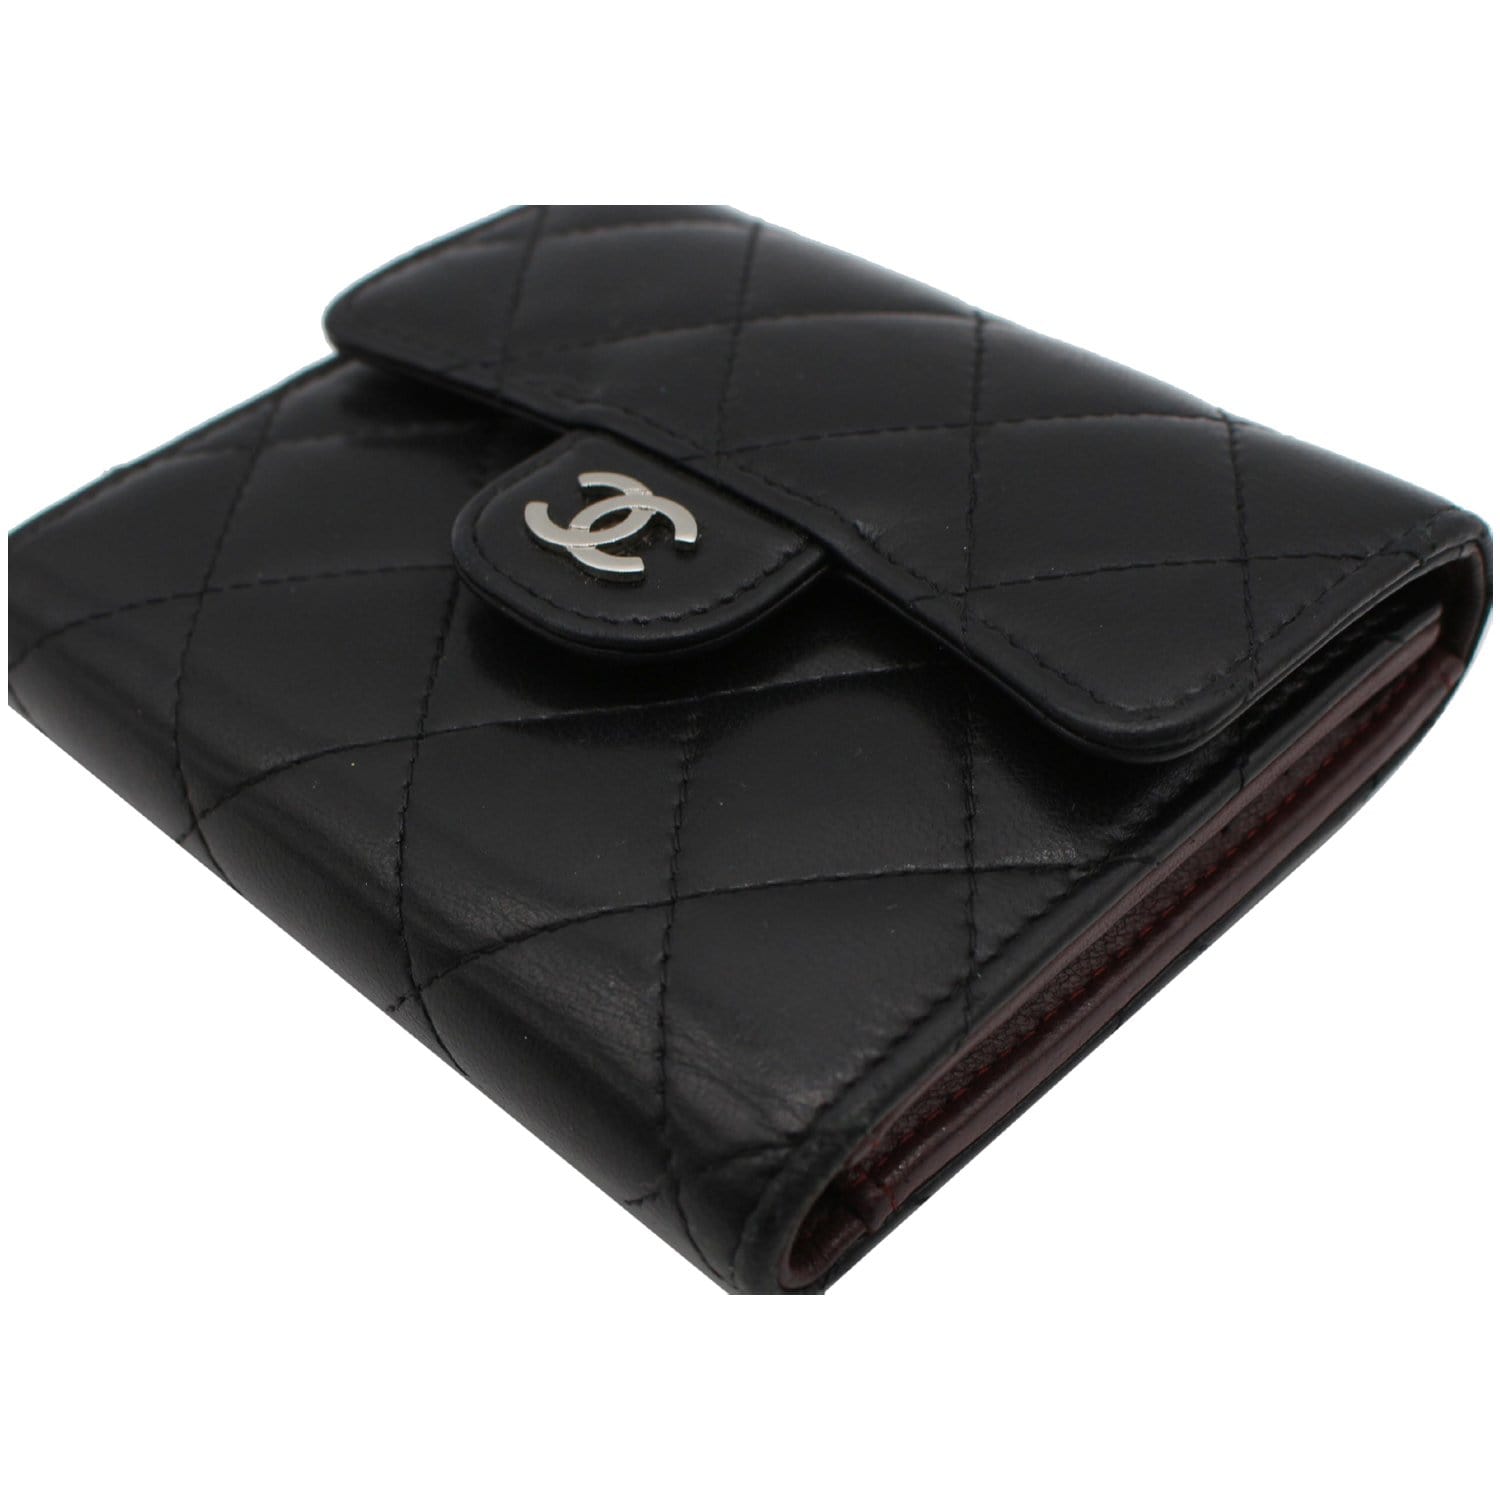 CHANEL Lambskin Quilted Glitter CC Flap Card Holder Wallet Black 1265209